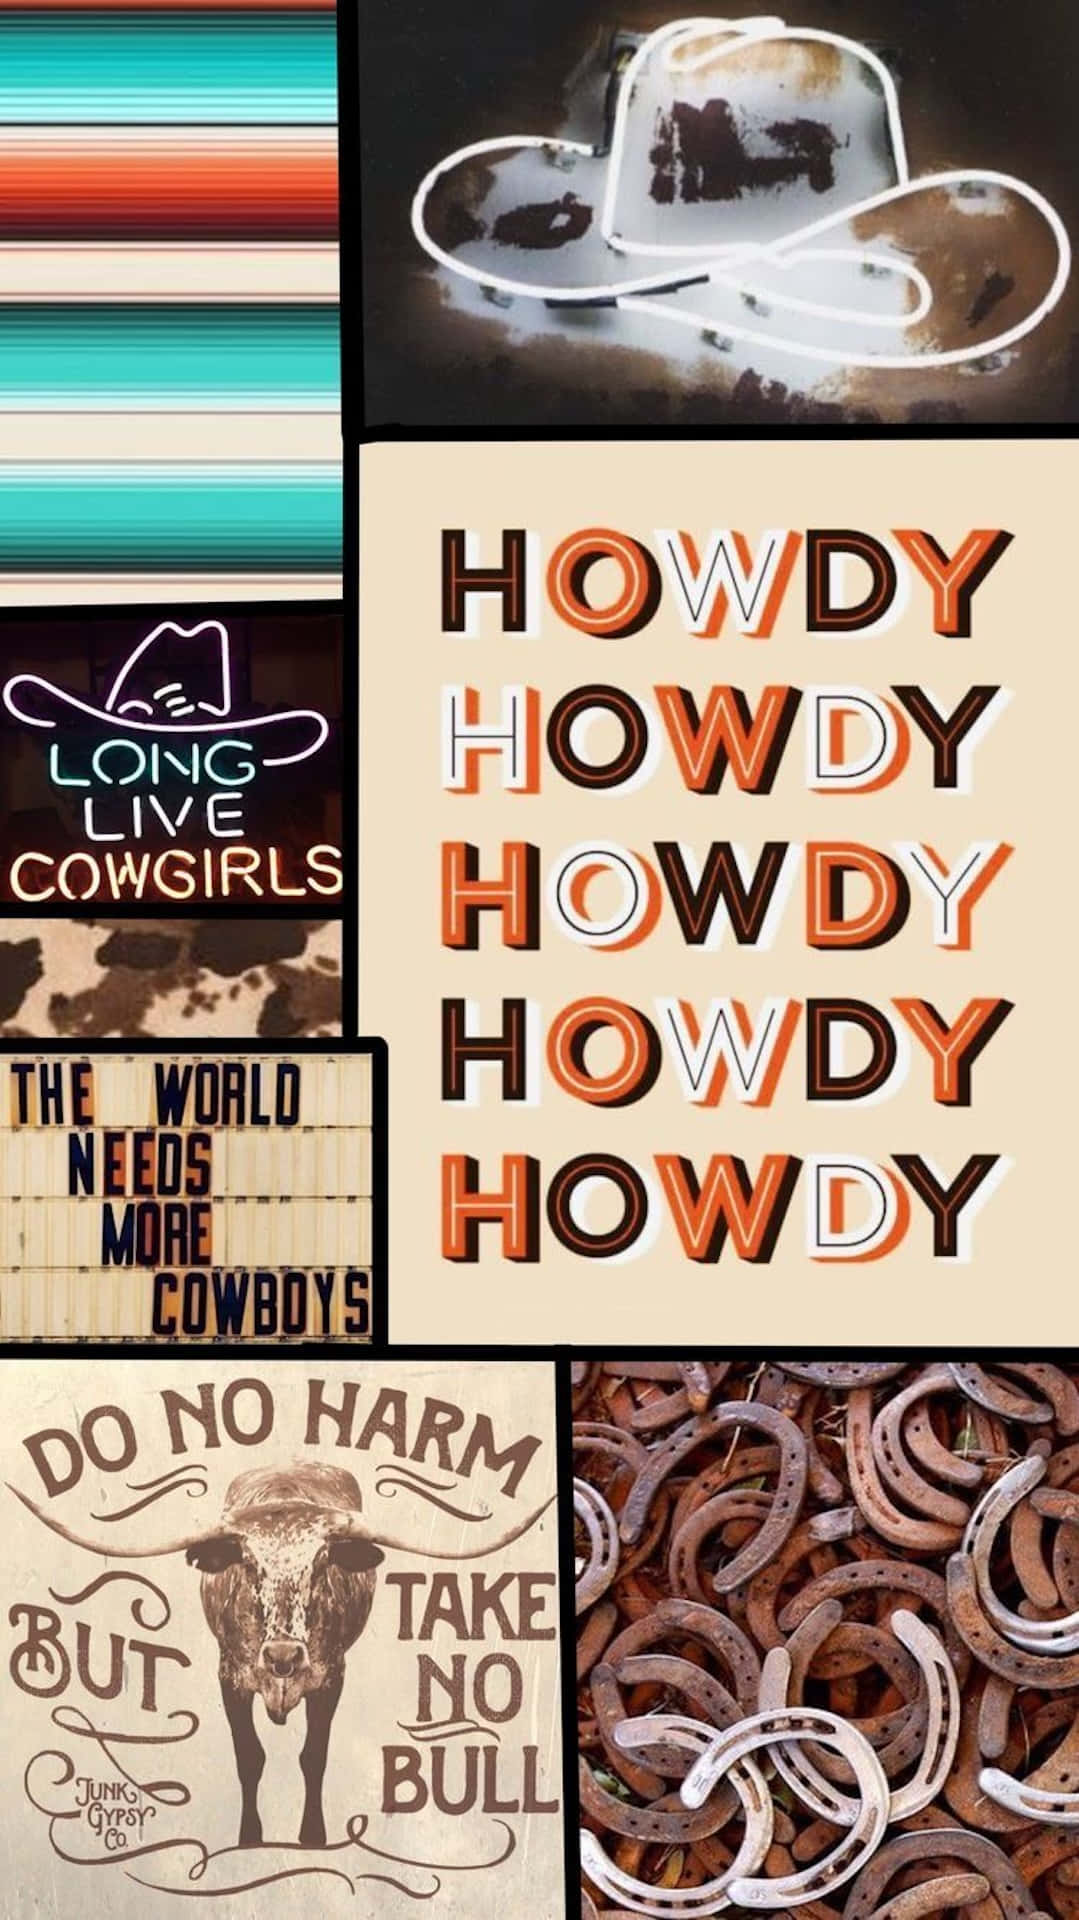 Country Cowgirl Aesthetic Collage Wallpaper